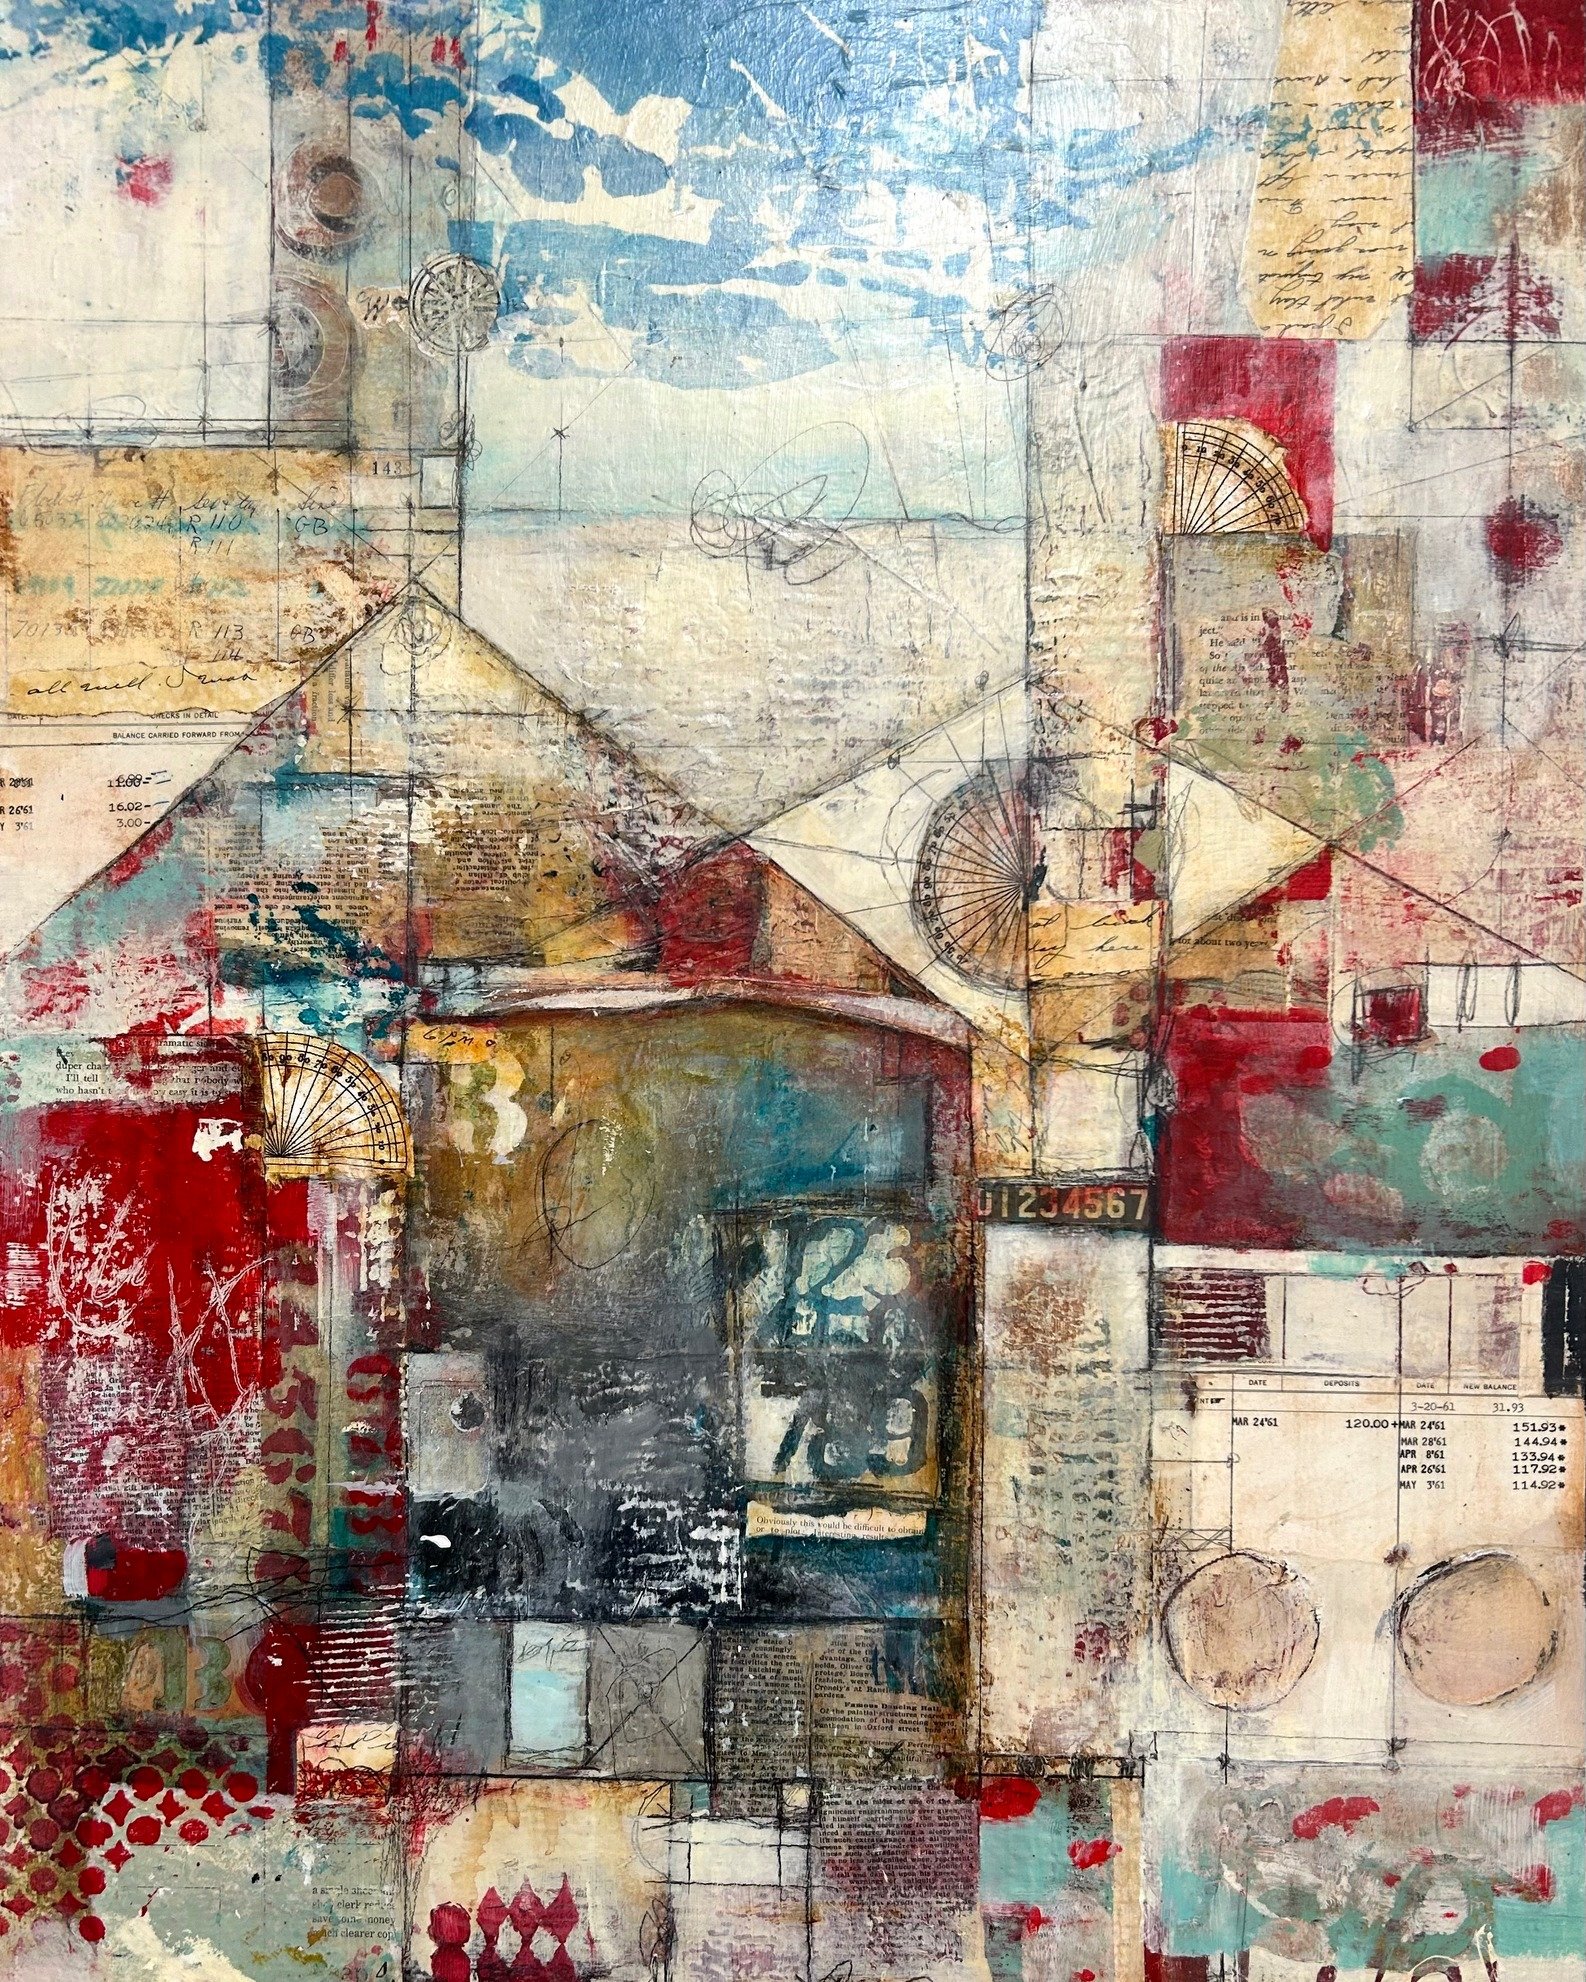 &quot;Remnants&quot; is a 22&quot;x28&quot; mixed media collage by @susanhartmixmedia. It's one of the pieces showing in &quot;Collage Nebraska&quot; at @hotshopsartcenter  through May 26. Please join us for the opening reception 6-8pm Saturday, May 